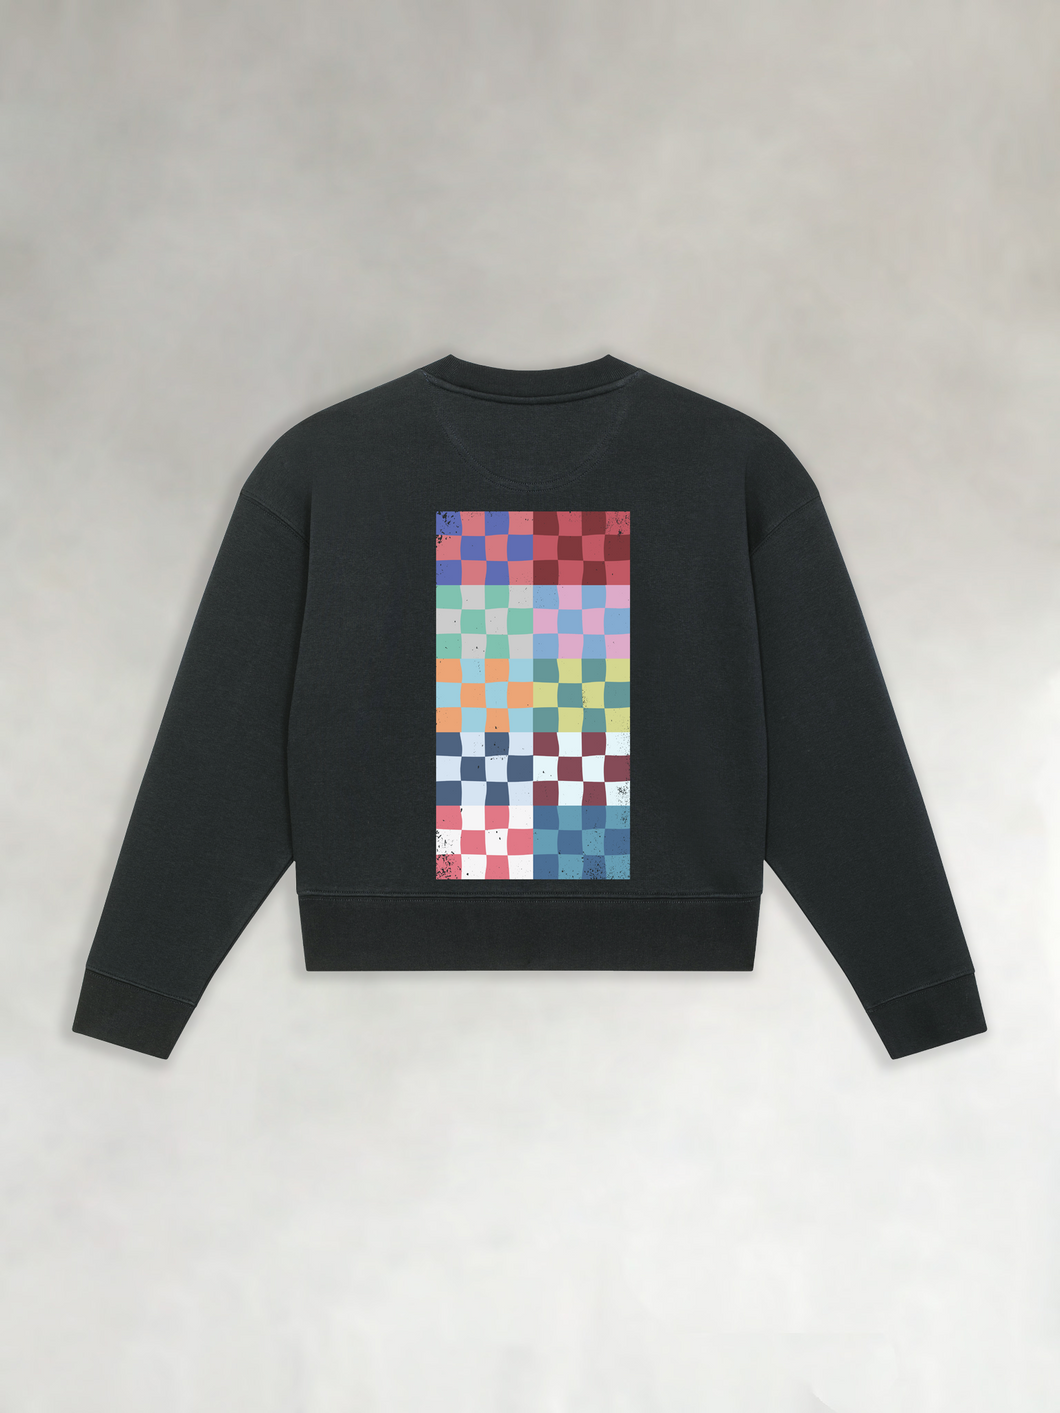 Racing Cropped Sweater: Teams Checkered